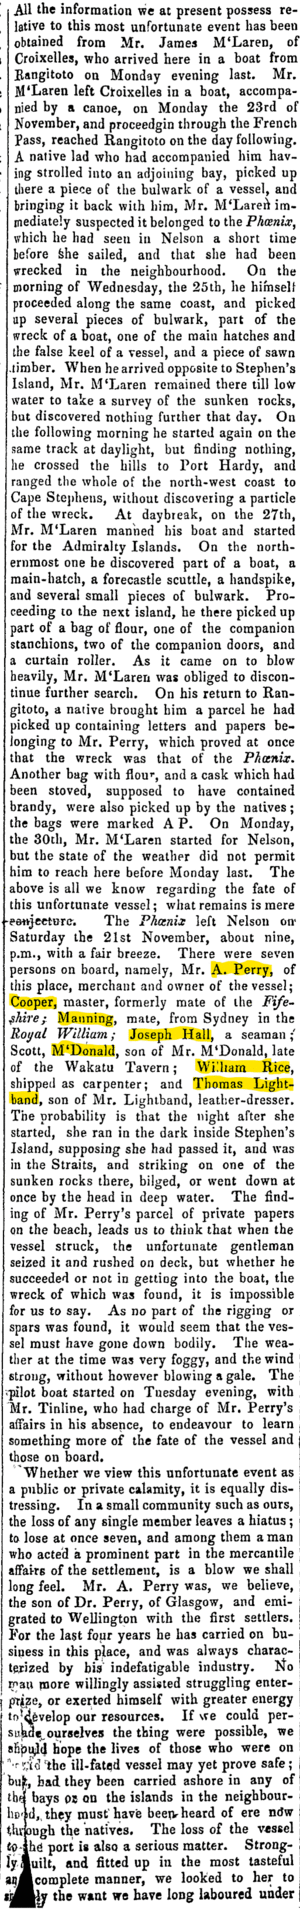 New Zealand Spectator and Cook's Strait Guardian, Volume III, Issue 149, 2 January 1847, Page 3